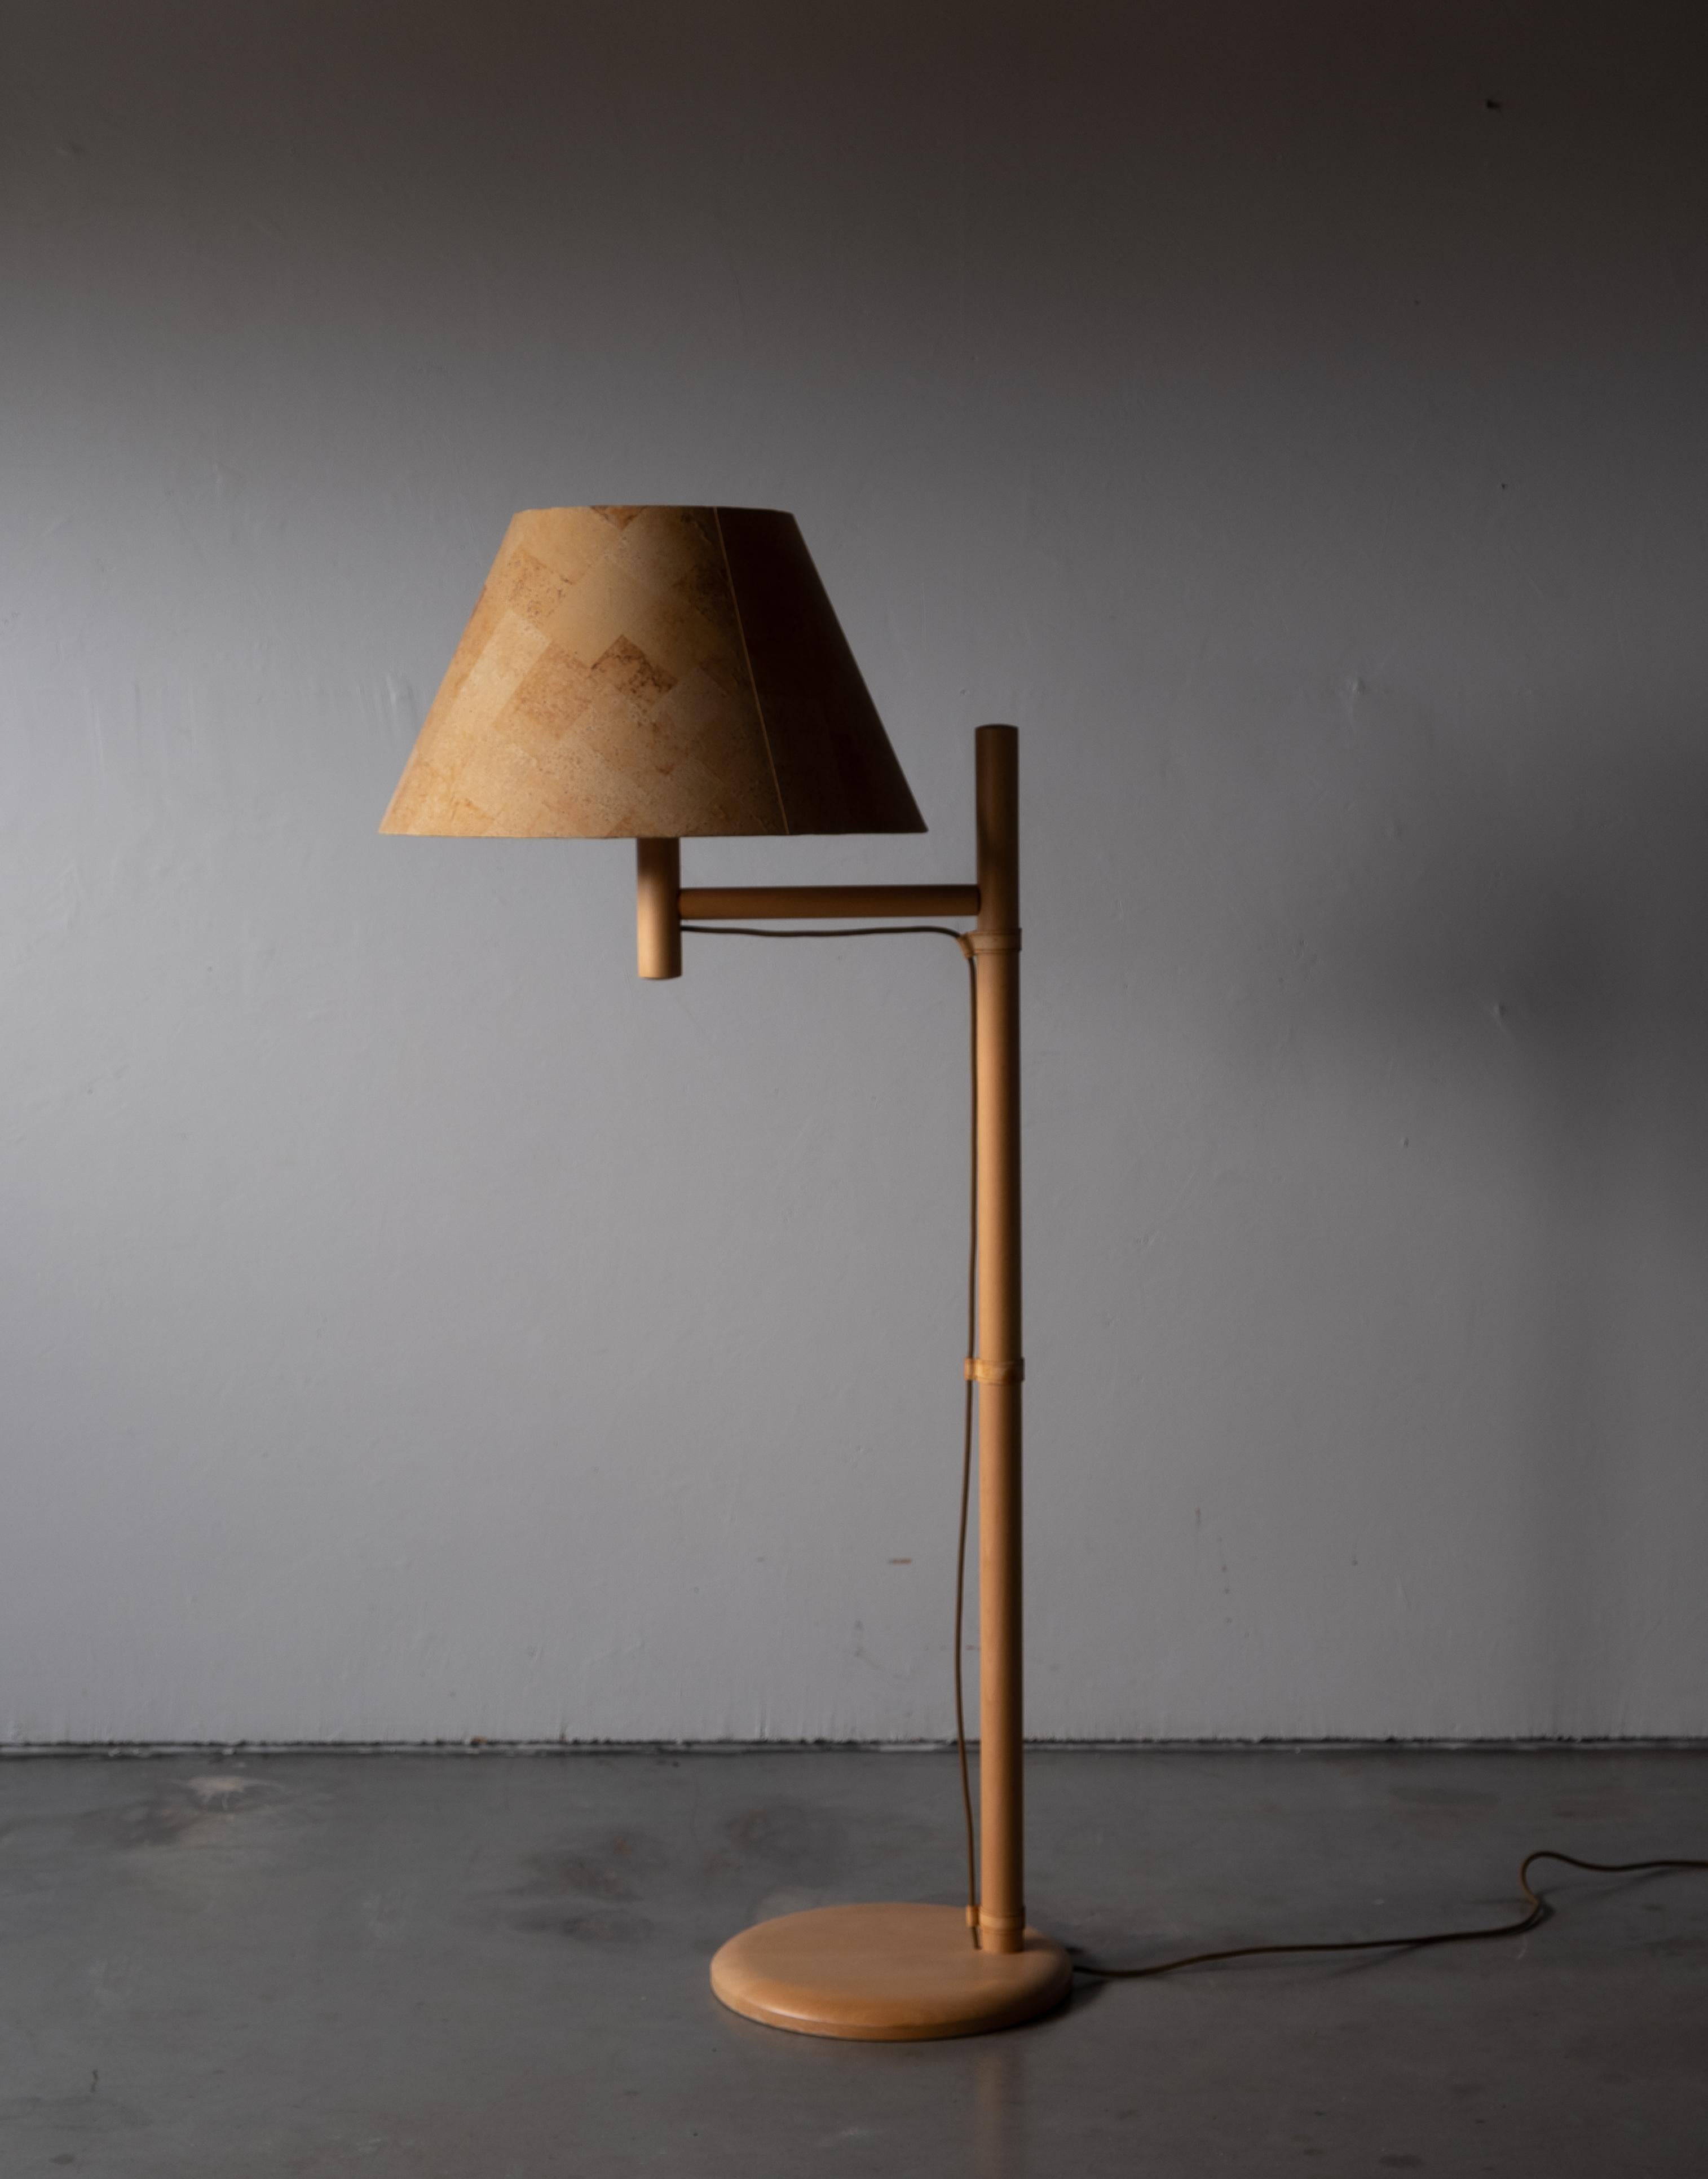 A floor lamp. Designed and produced by Bergboms, Sweden, c. 1970s. Labeled.

Features its original faux cork veneer lampshade.

Other designers of the period include Paavo Tynell, Hans Bergström, Josef Frank, and Kaare Klint.